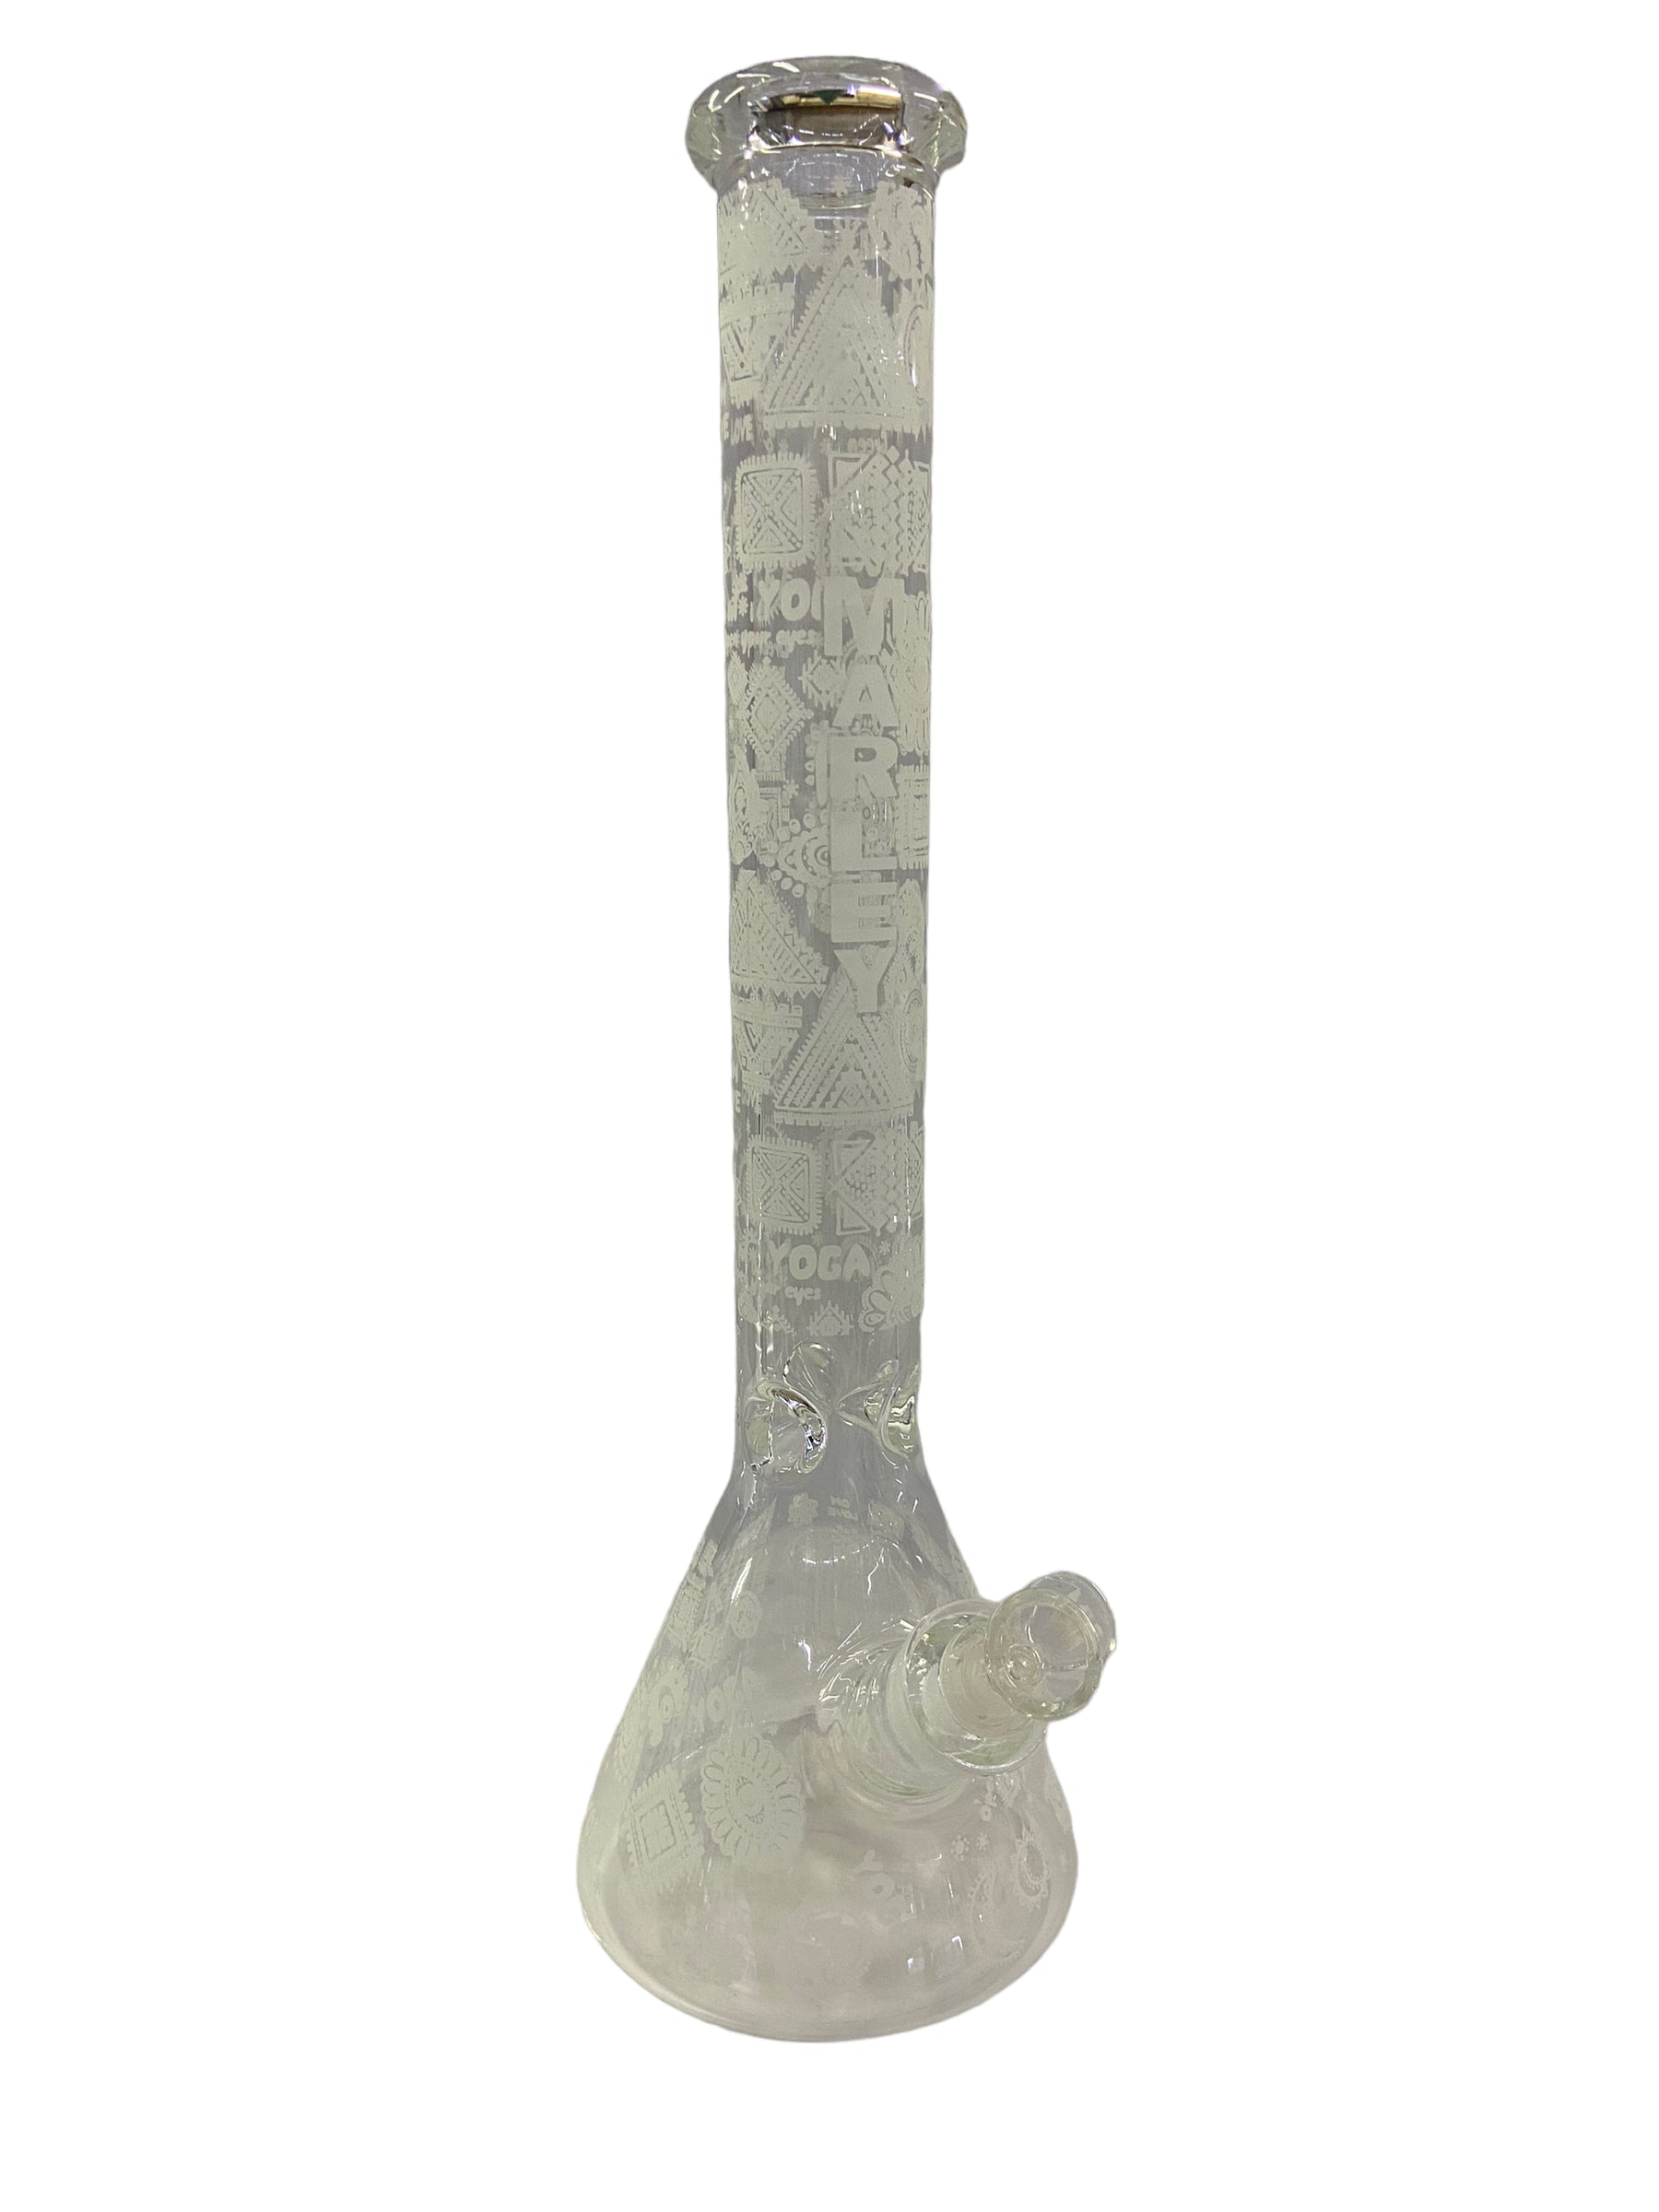 Marley (18") Glow in the Dark Etched Bong - glass bong - the wee smoke shop